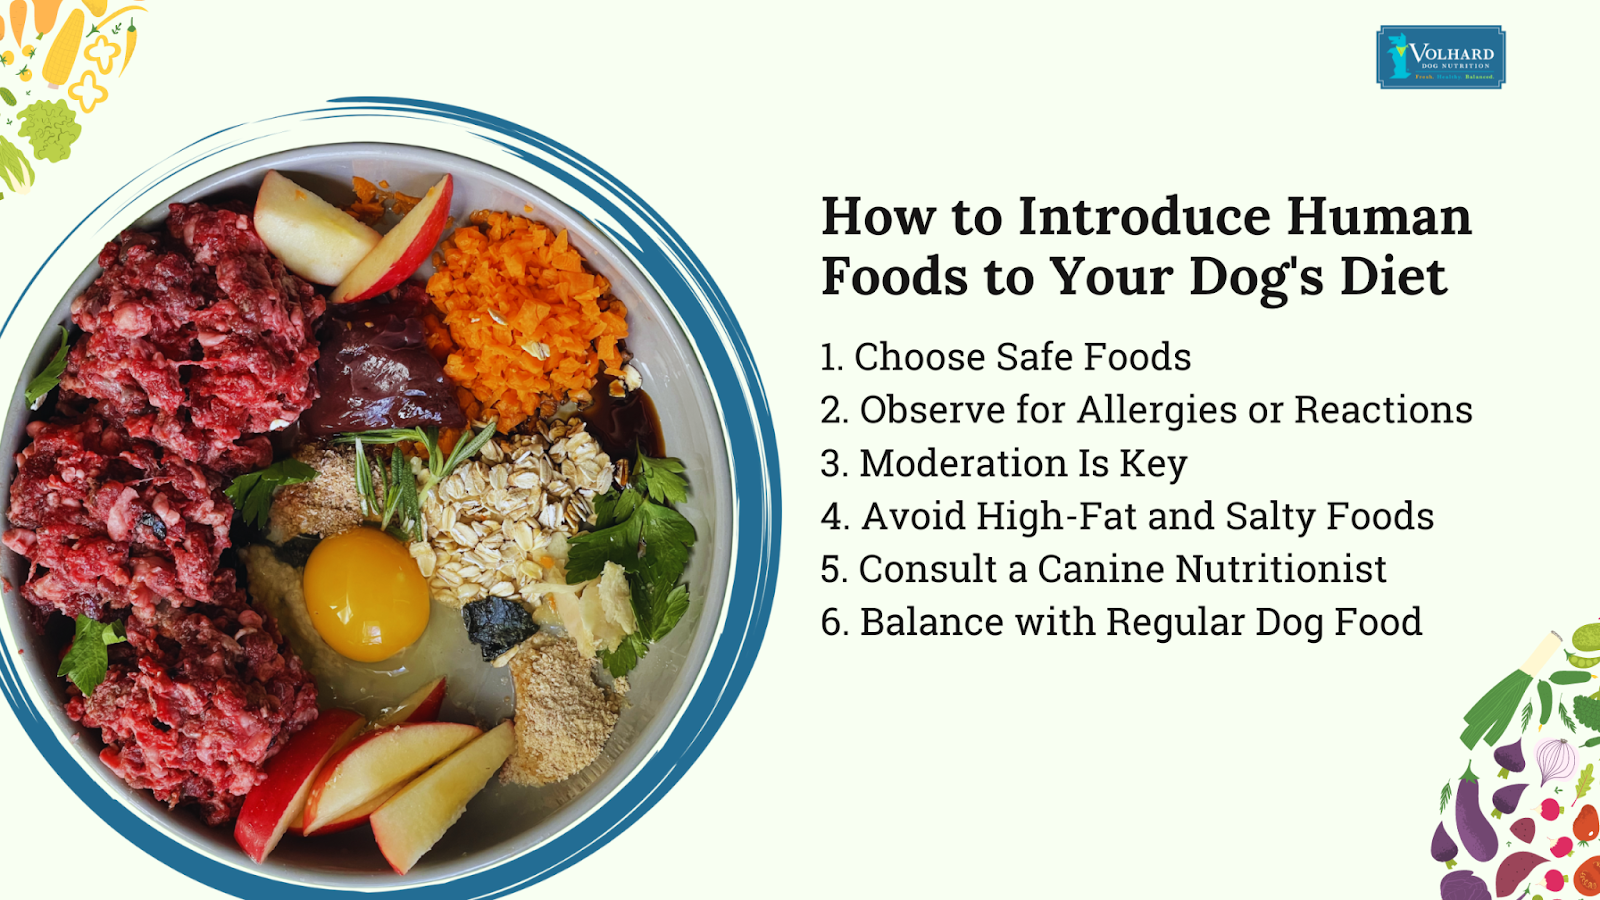 How to introduce human foods to your dog's diet